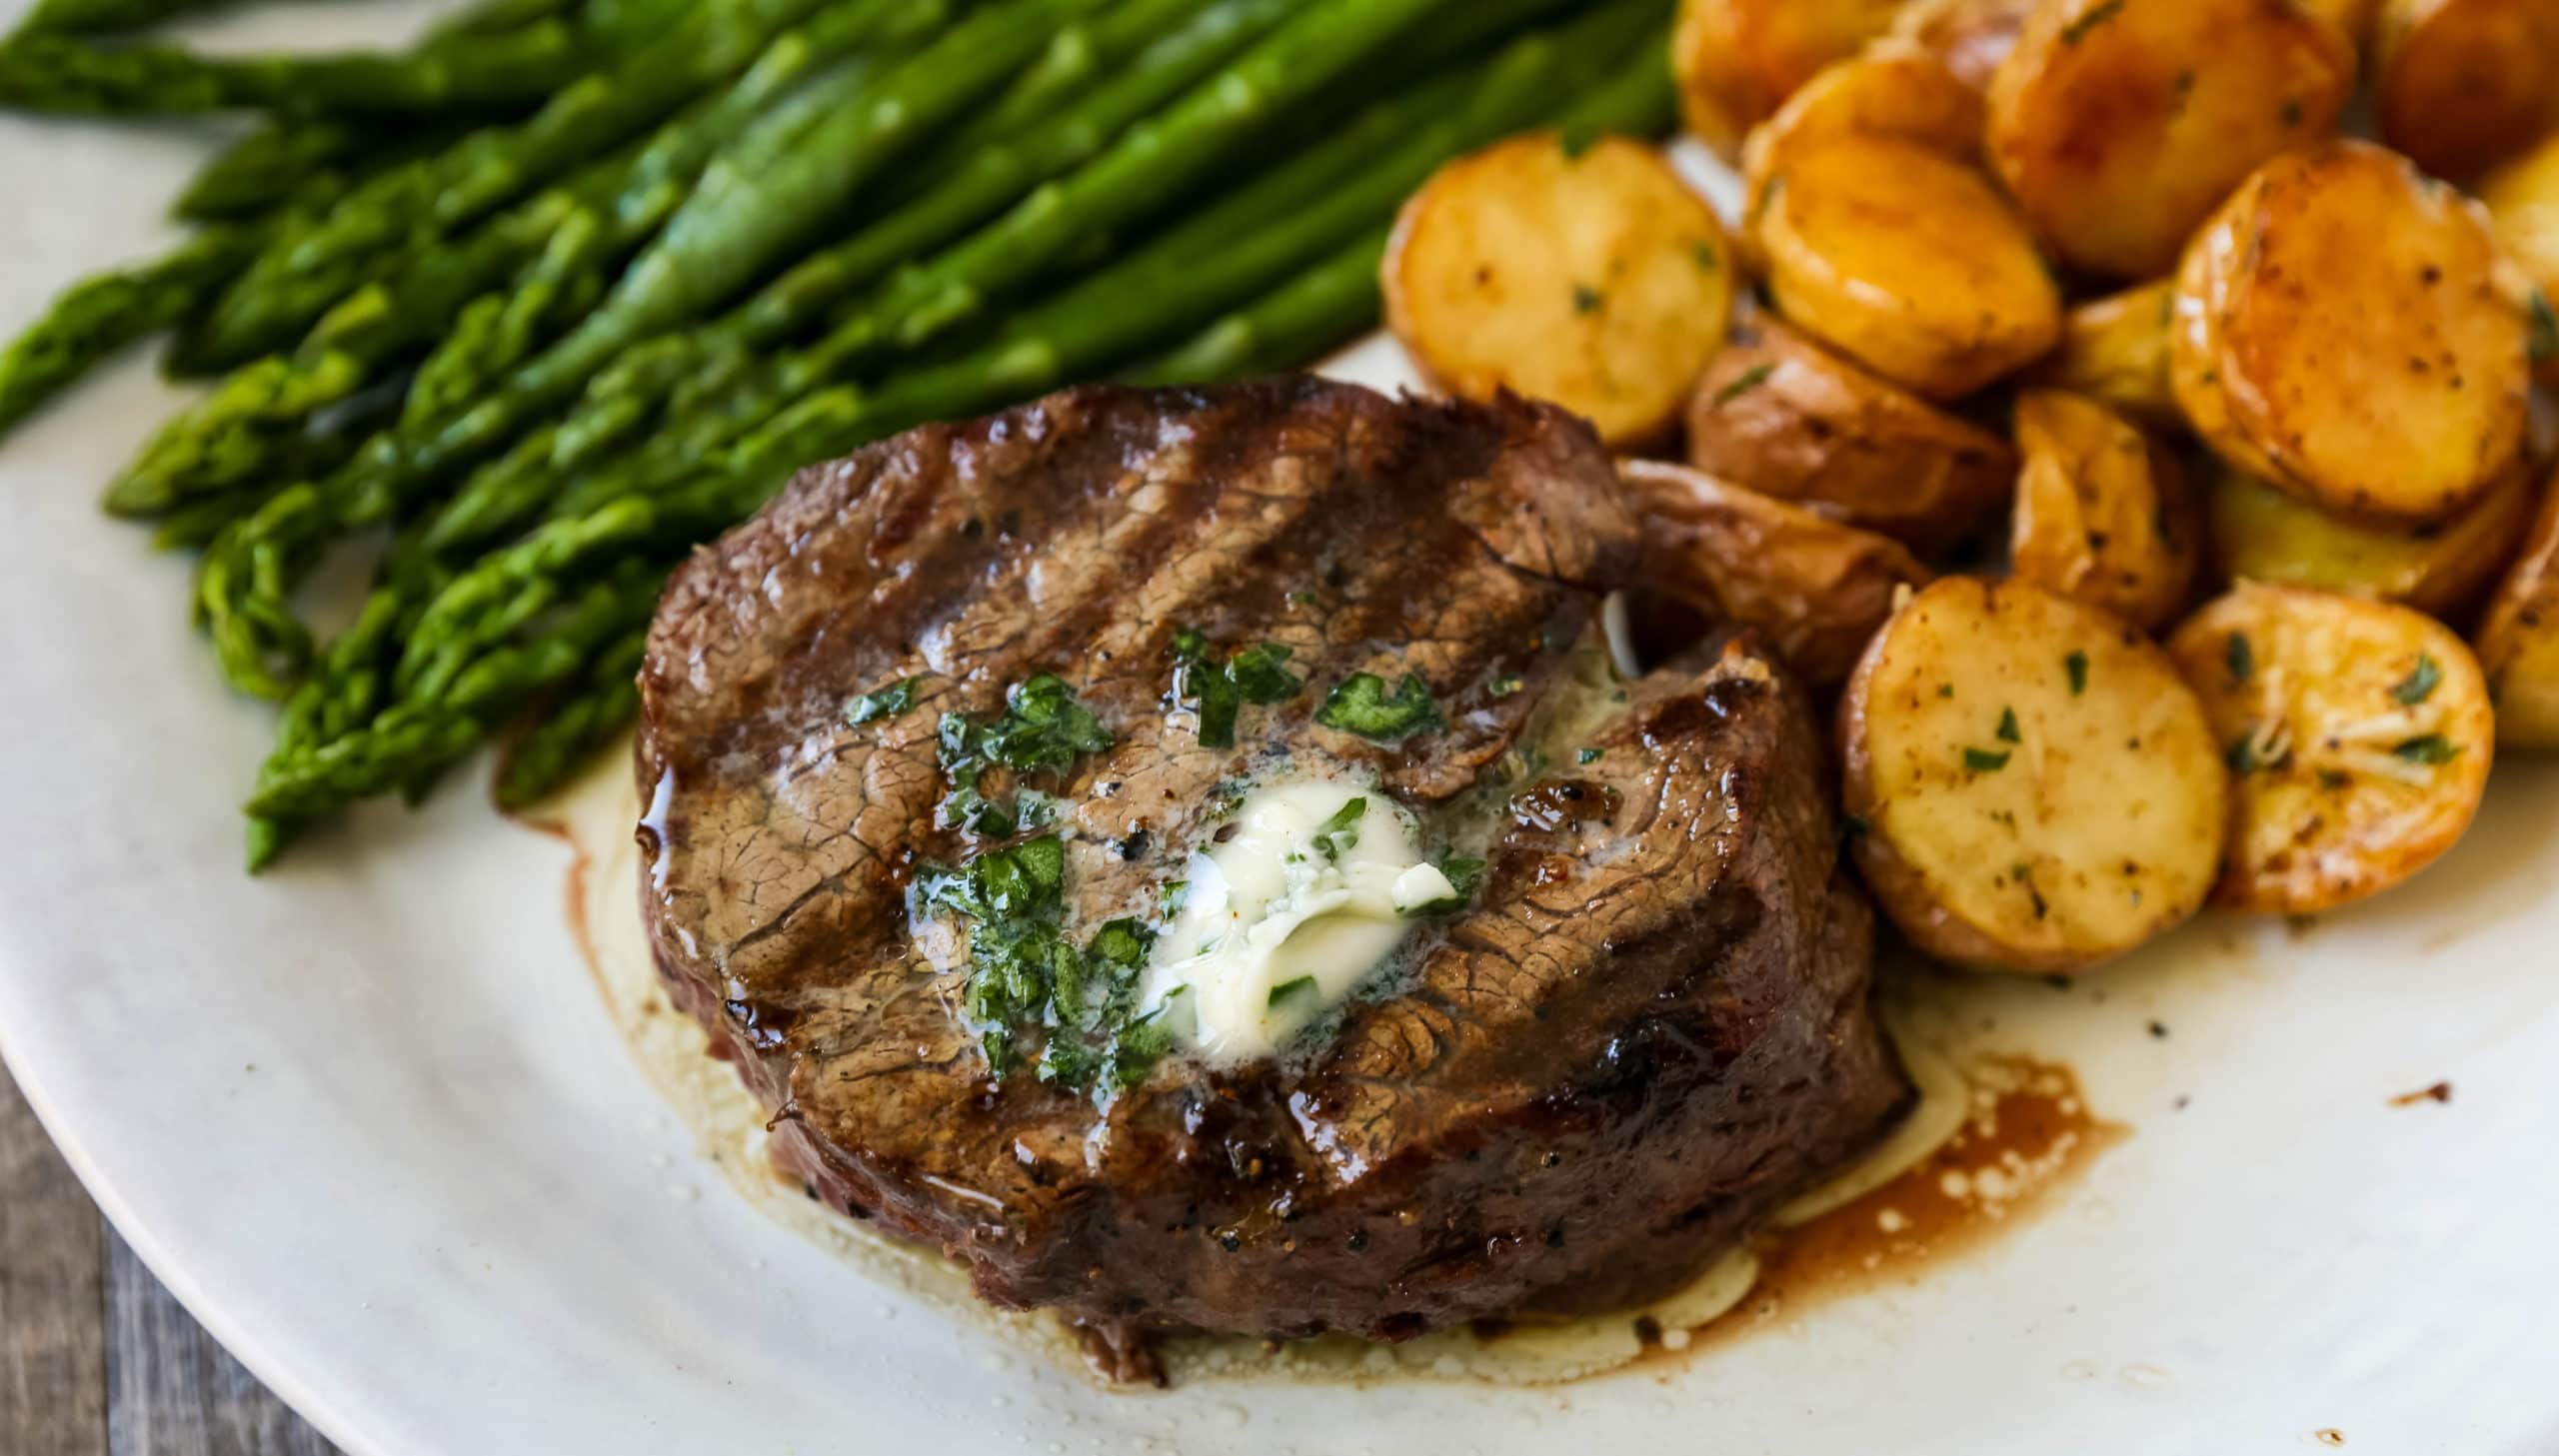 How to Cook Steak Perfectly Every Single Time